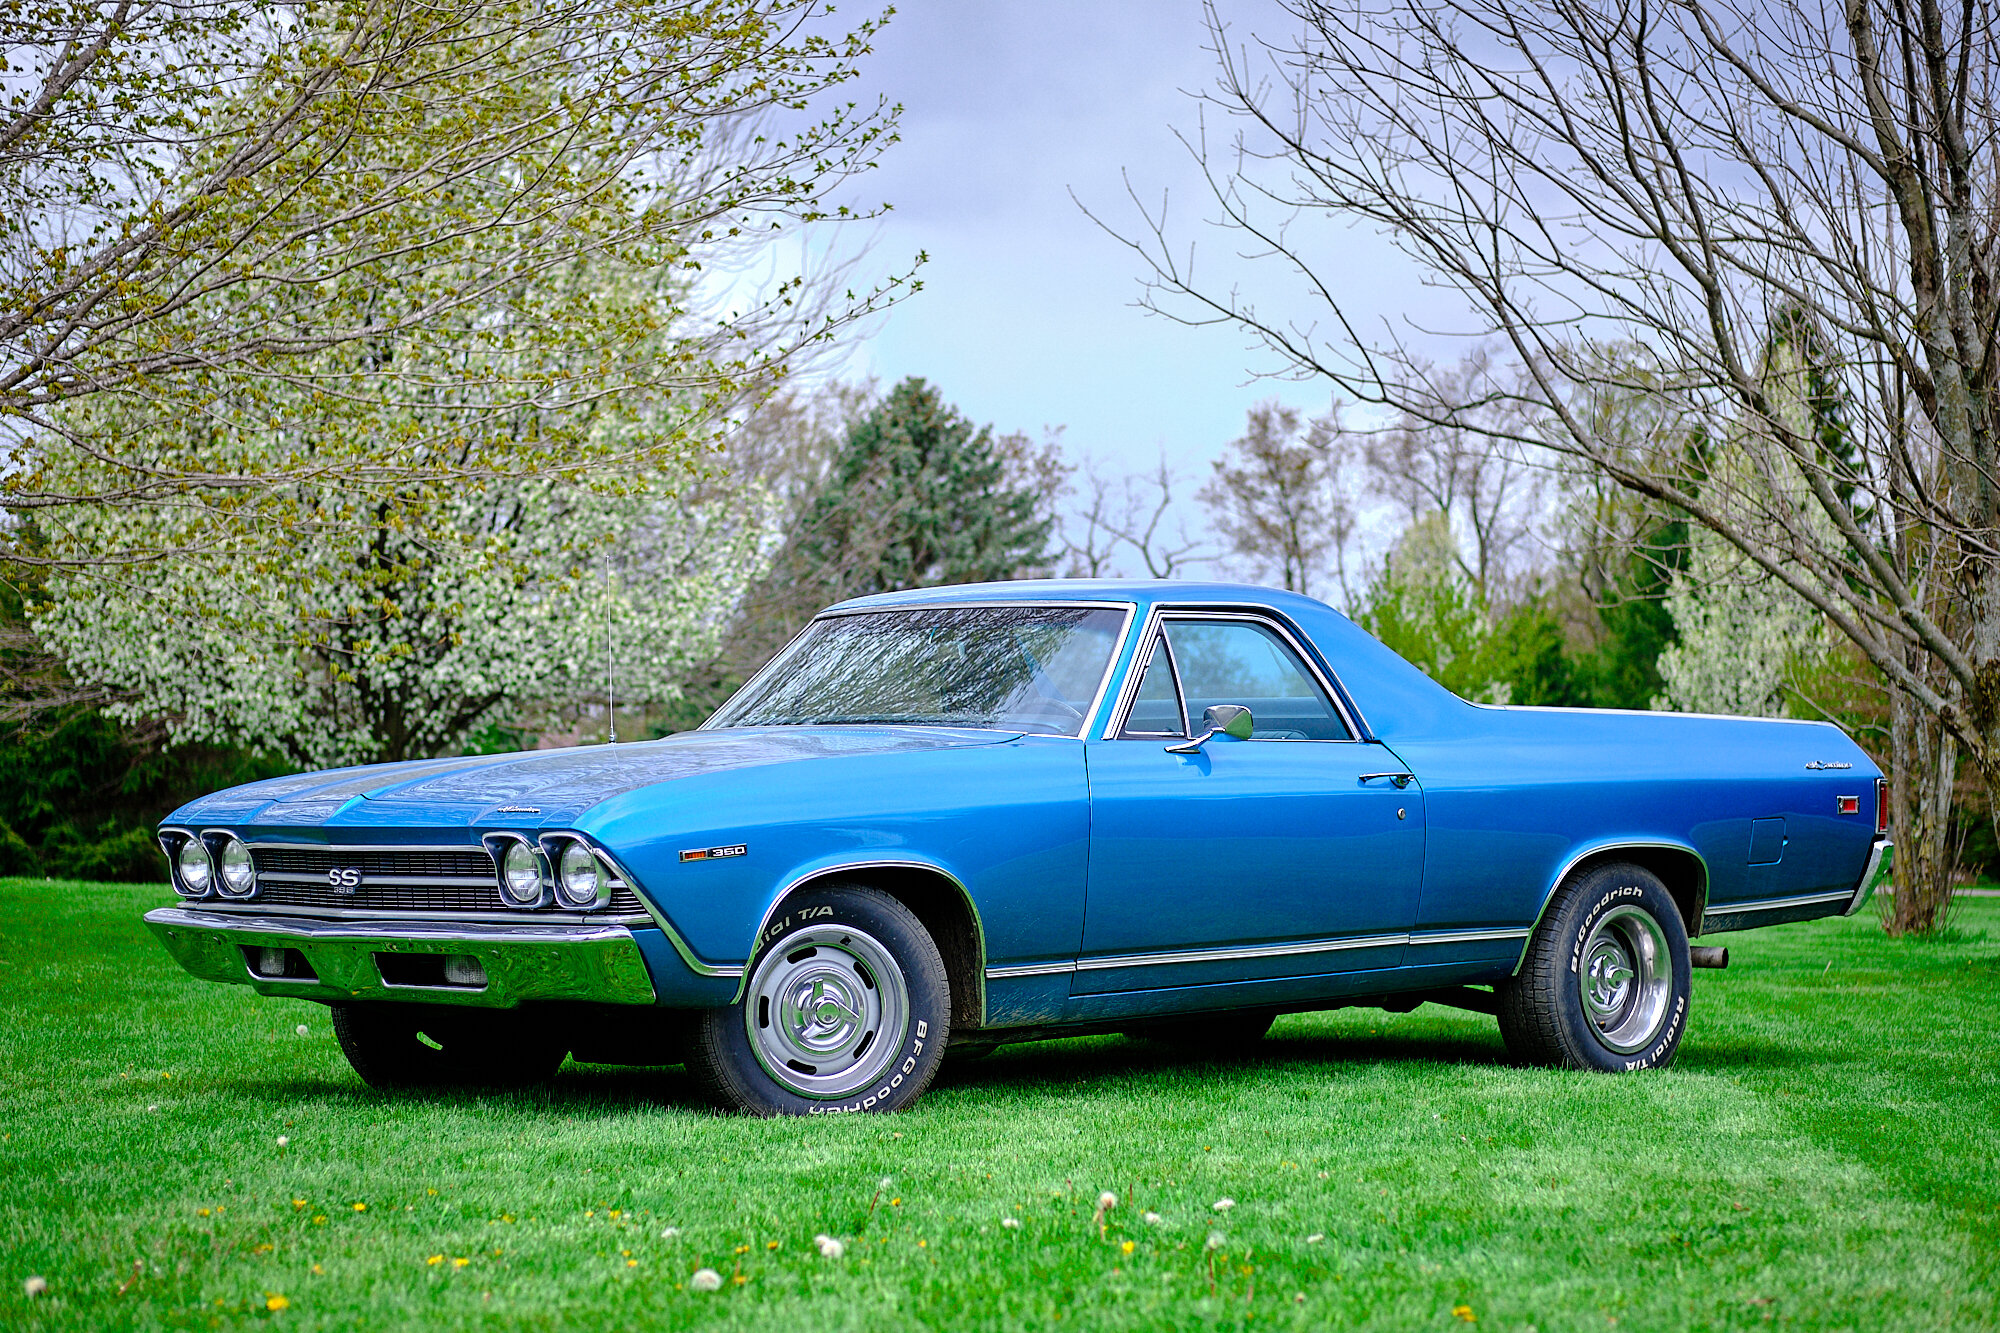  My good friend Andy is an excellent mechanic who is forever fixing up old cars. One of his favorite is this '69 El Camino. | 5/10/20 Ann Arbor, MI 